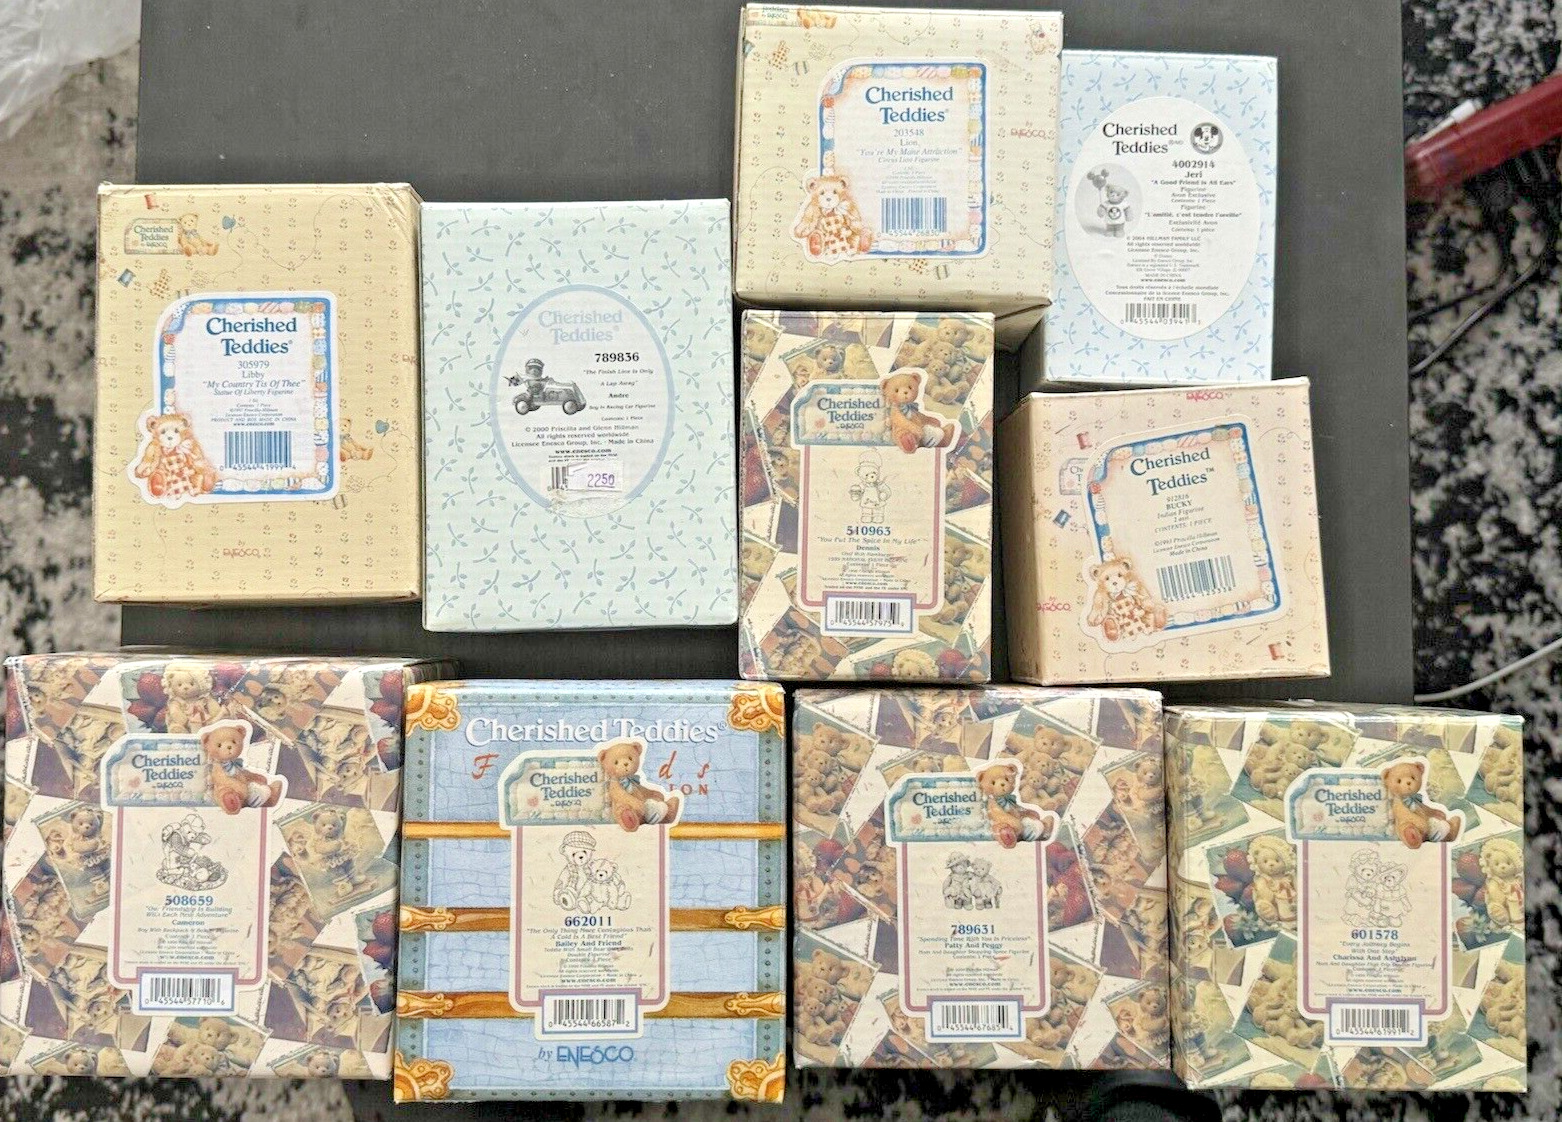 Cherished Teddies By Enesco Lot of 10 with Boxes and COA's all in VG Condition